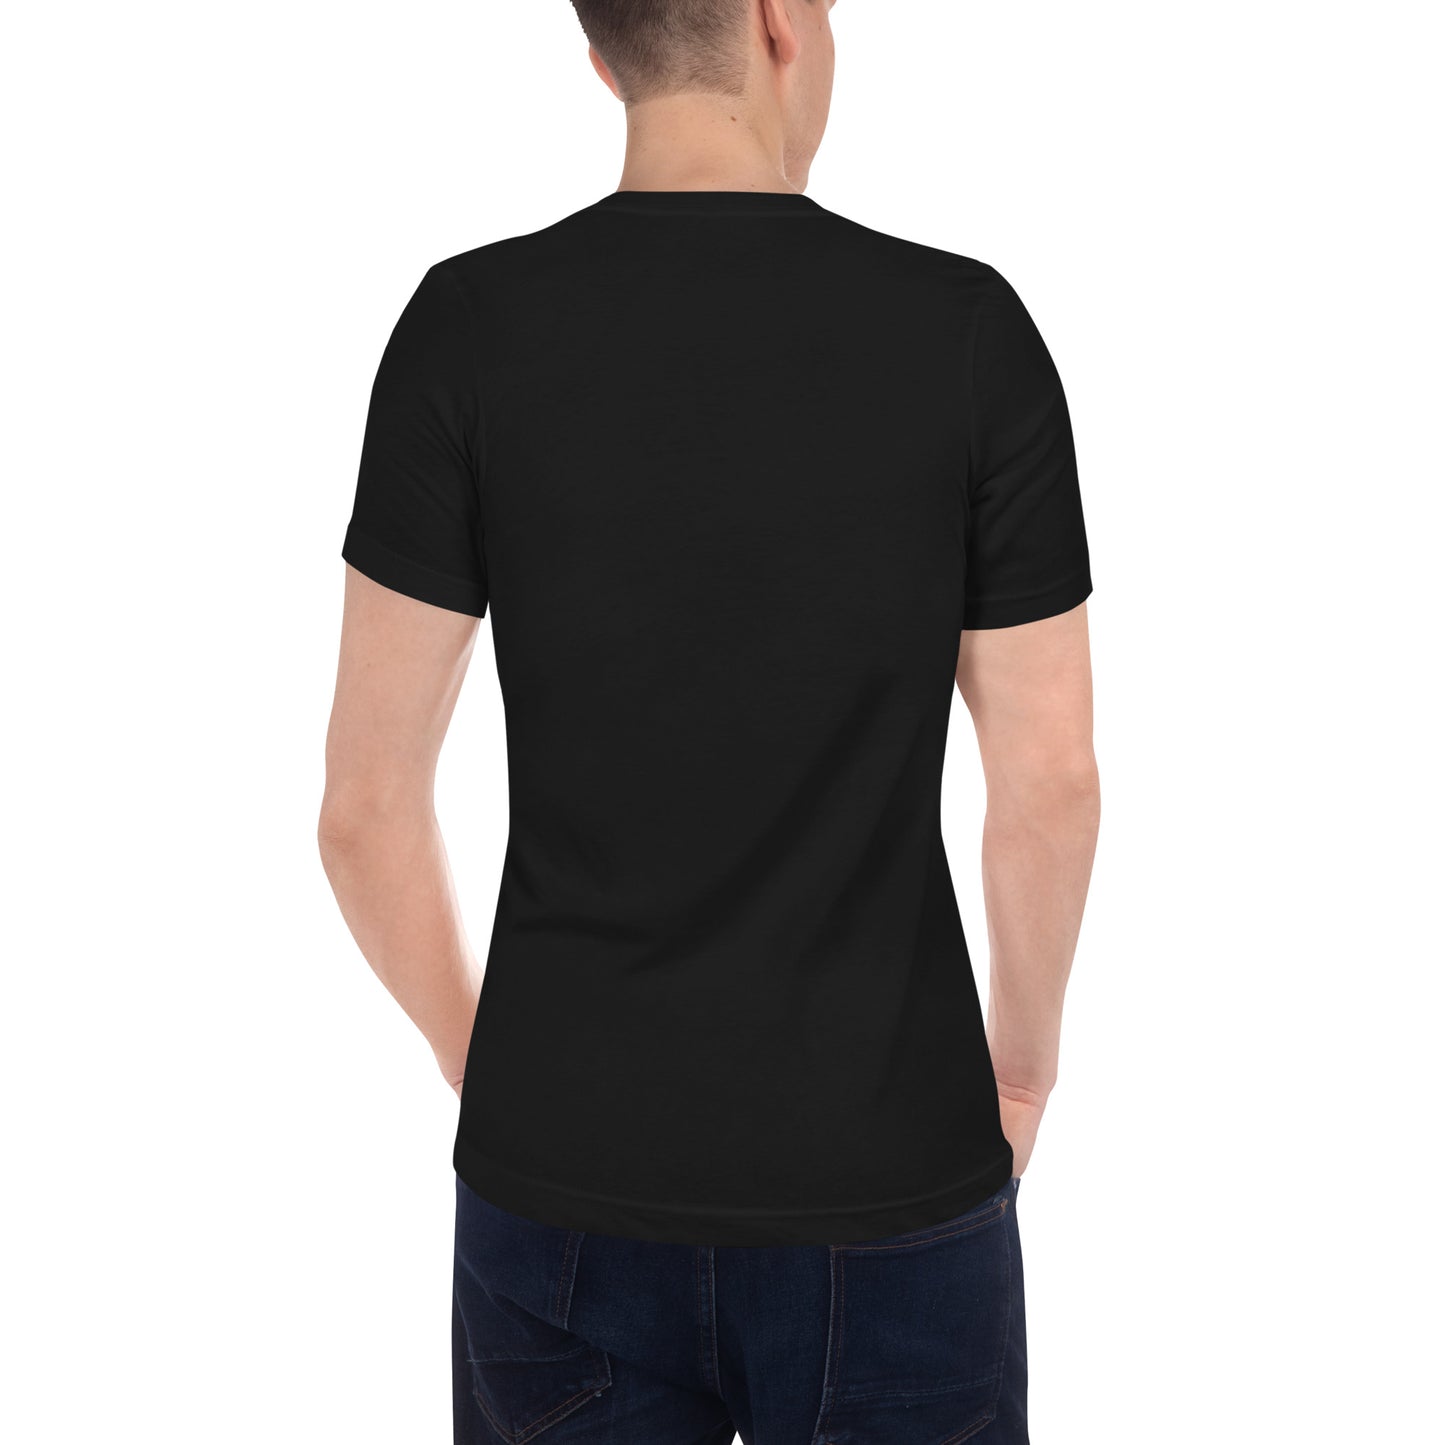 Express your dominance with the 'Breeder' unisex short sleeve V-neck T-shirt, designed to empower and inspire gay tops. Make a statement and embrace your power with this trendy and inclusive fashion piece.